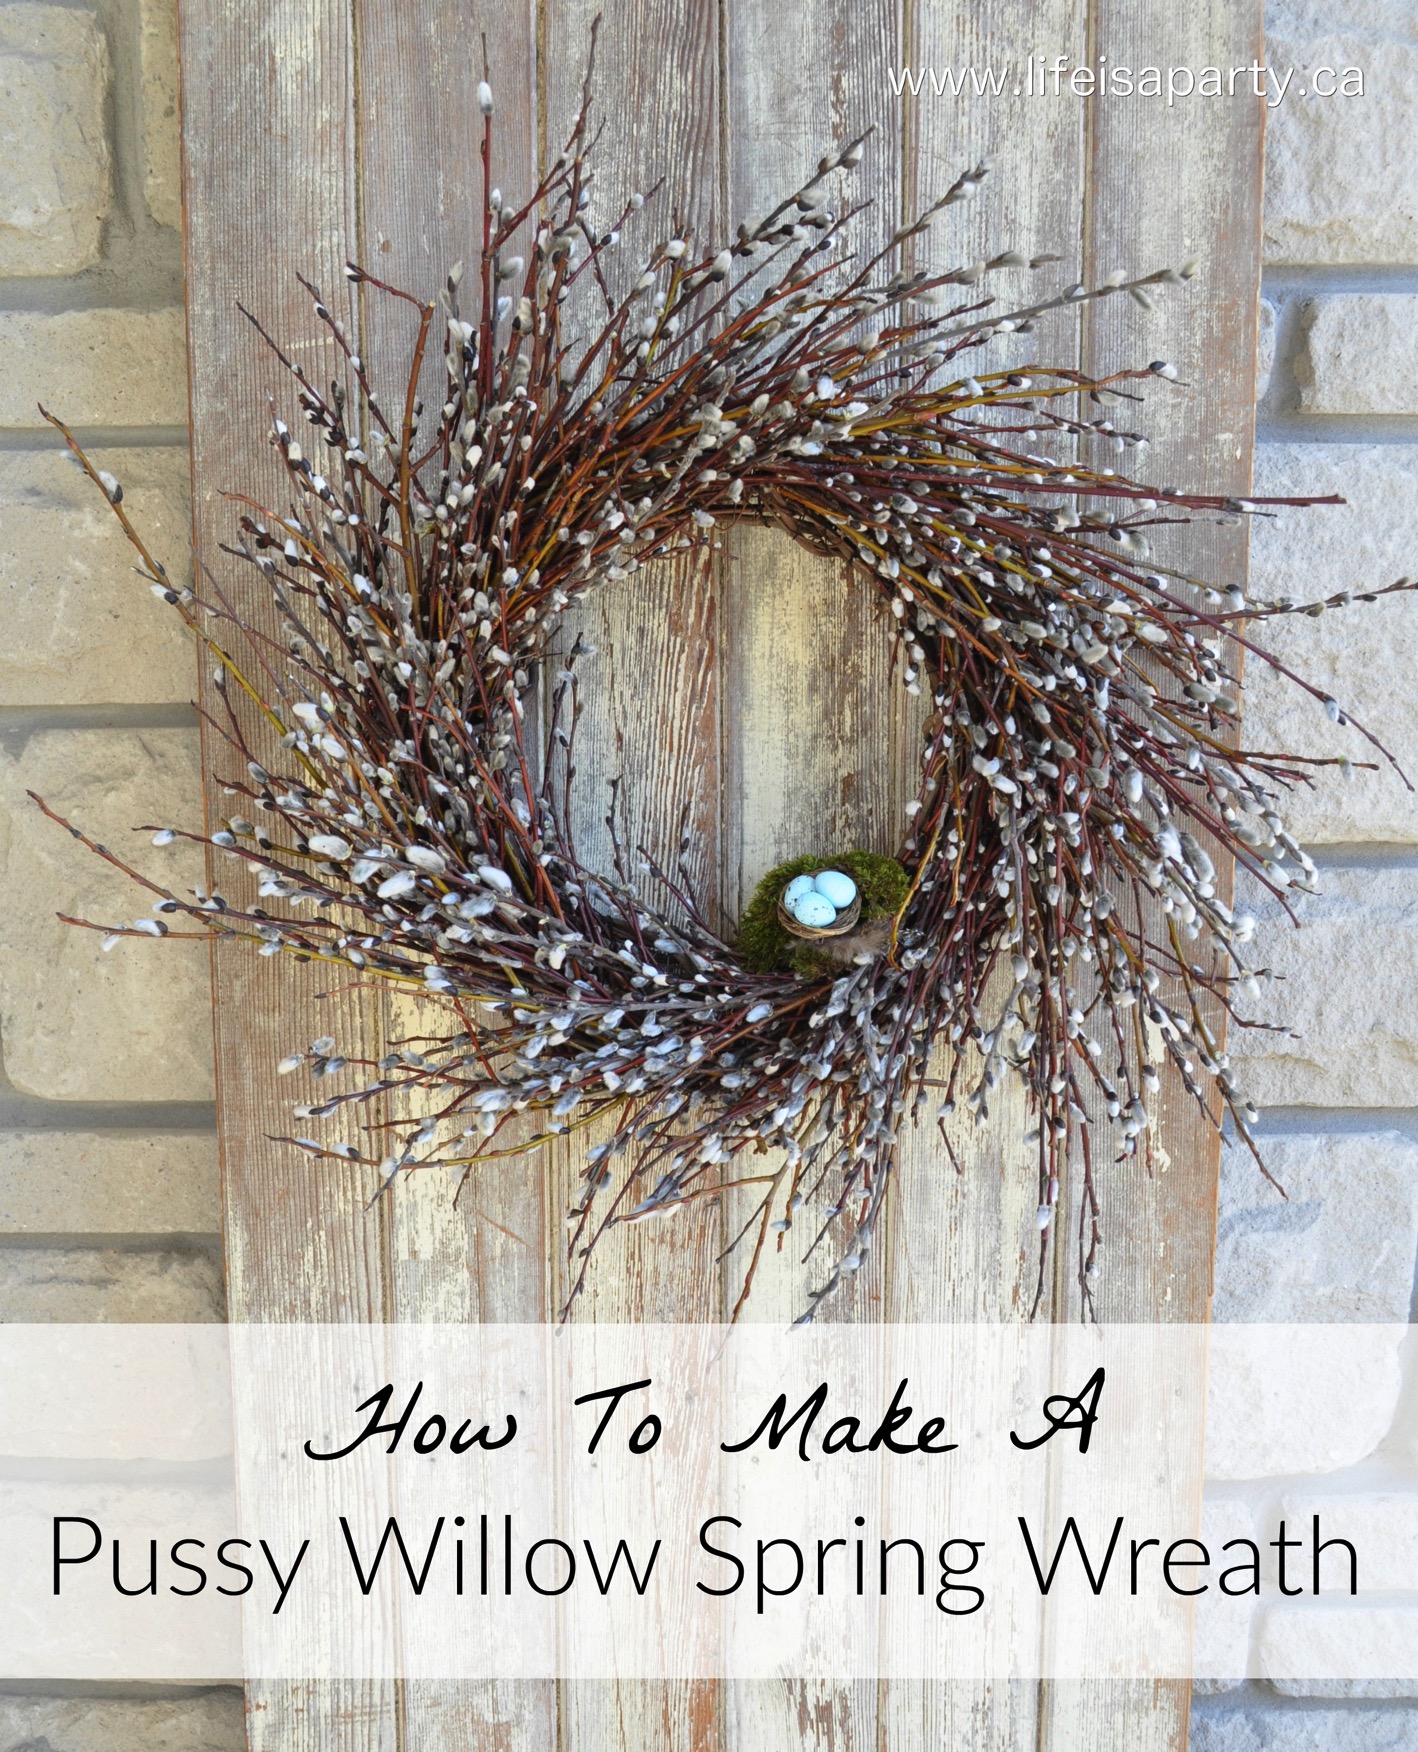 How To Make a Pussy Willow Spring Wreath: easy tutorial on how to use a grapevine wreath base and create a beautiful pussy willow wreath for spring.